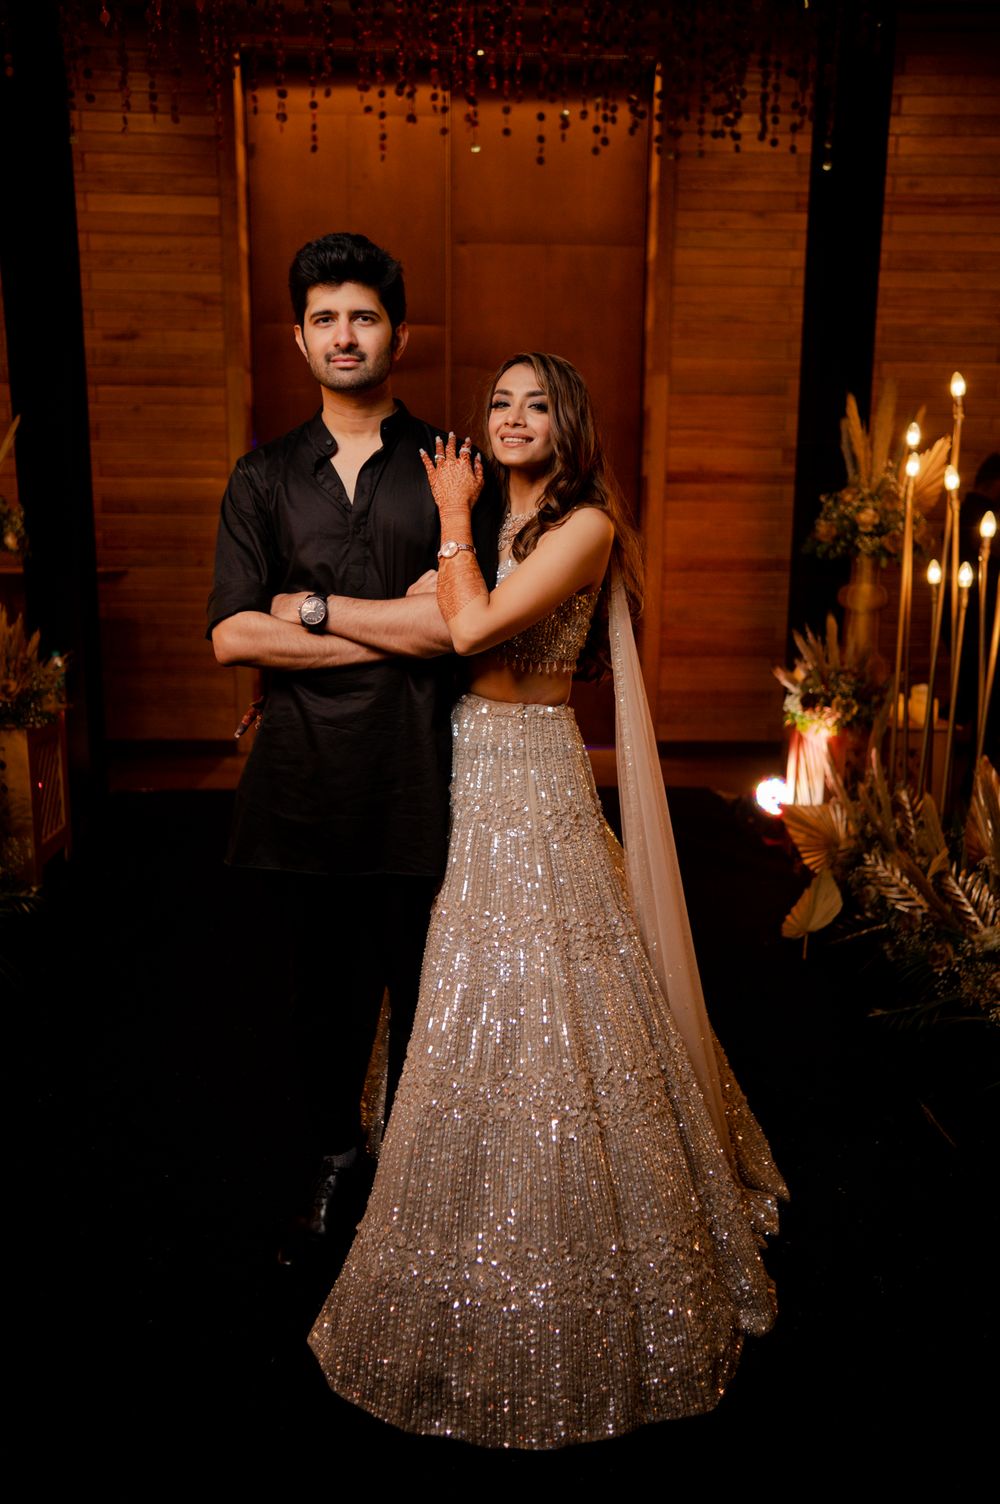 Photo of Couple portrait with the bride in a shimmery gold lehenga and groom in an all-black ensemble